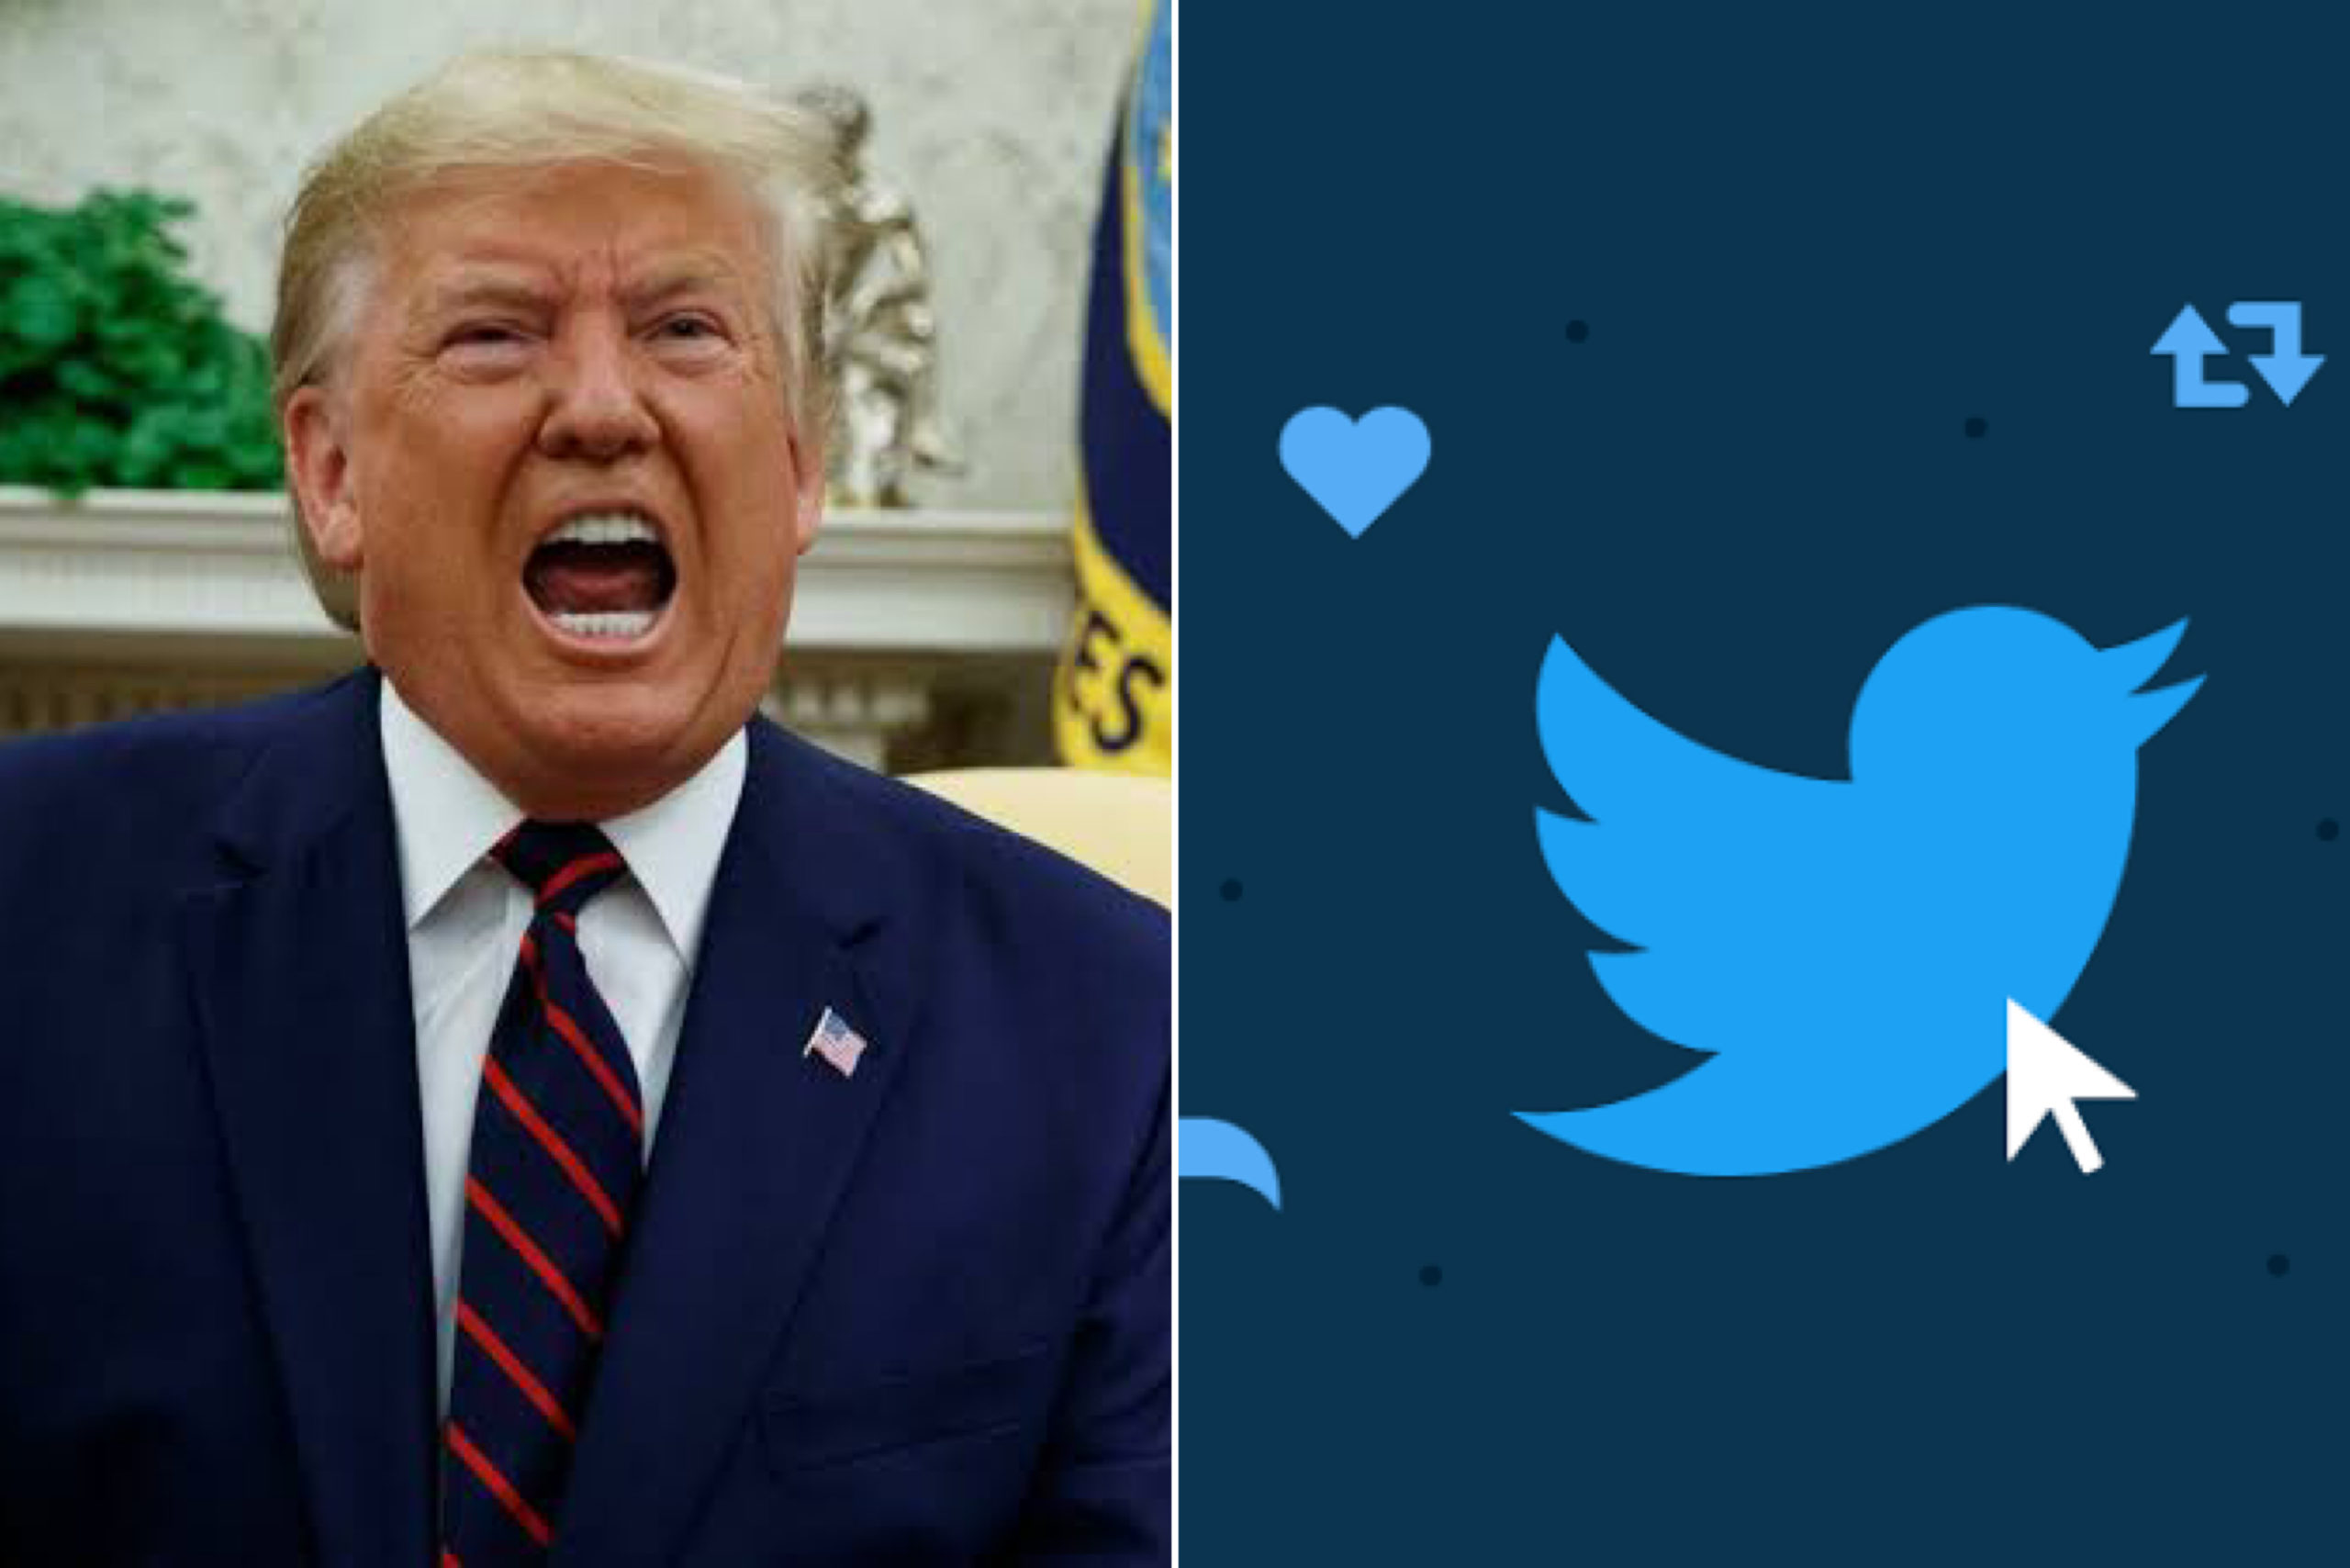 ‘We Will Not Be Silenced’ - Trump Reacts To Permanent Ban Of Twitter Account